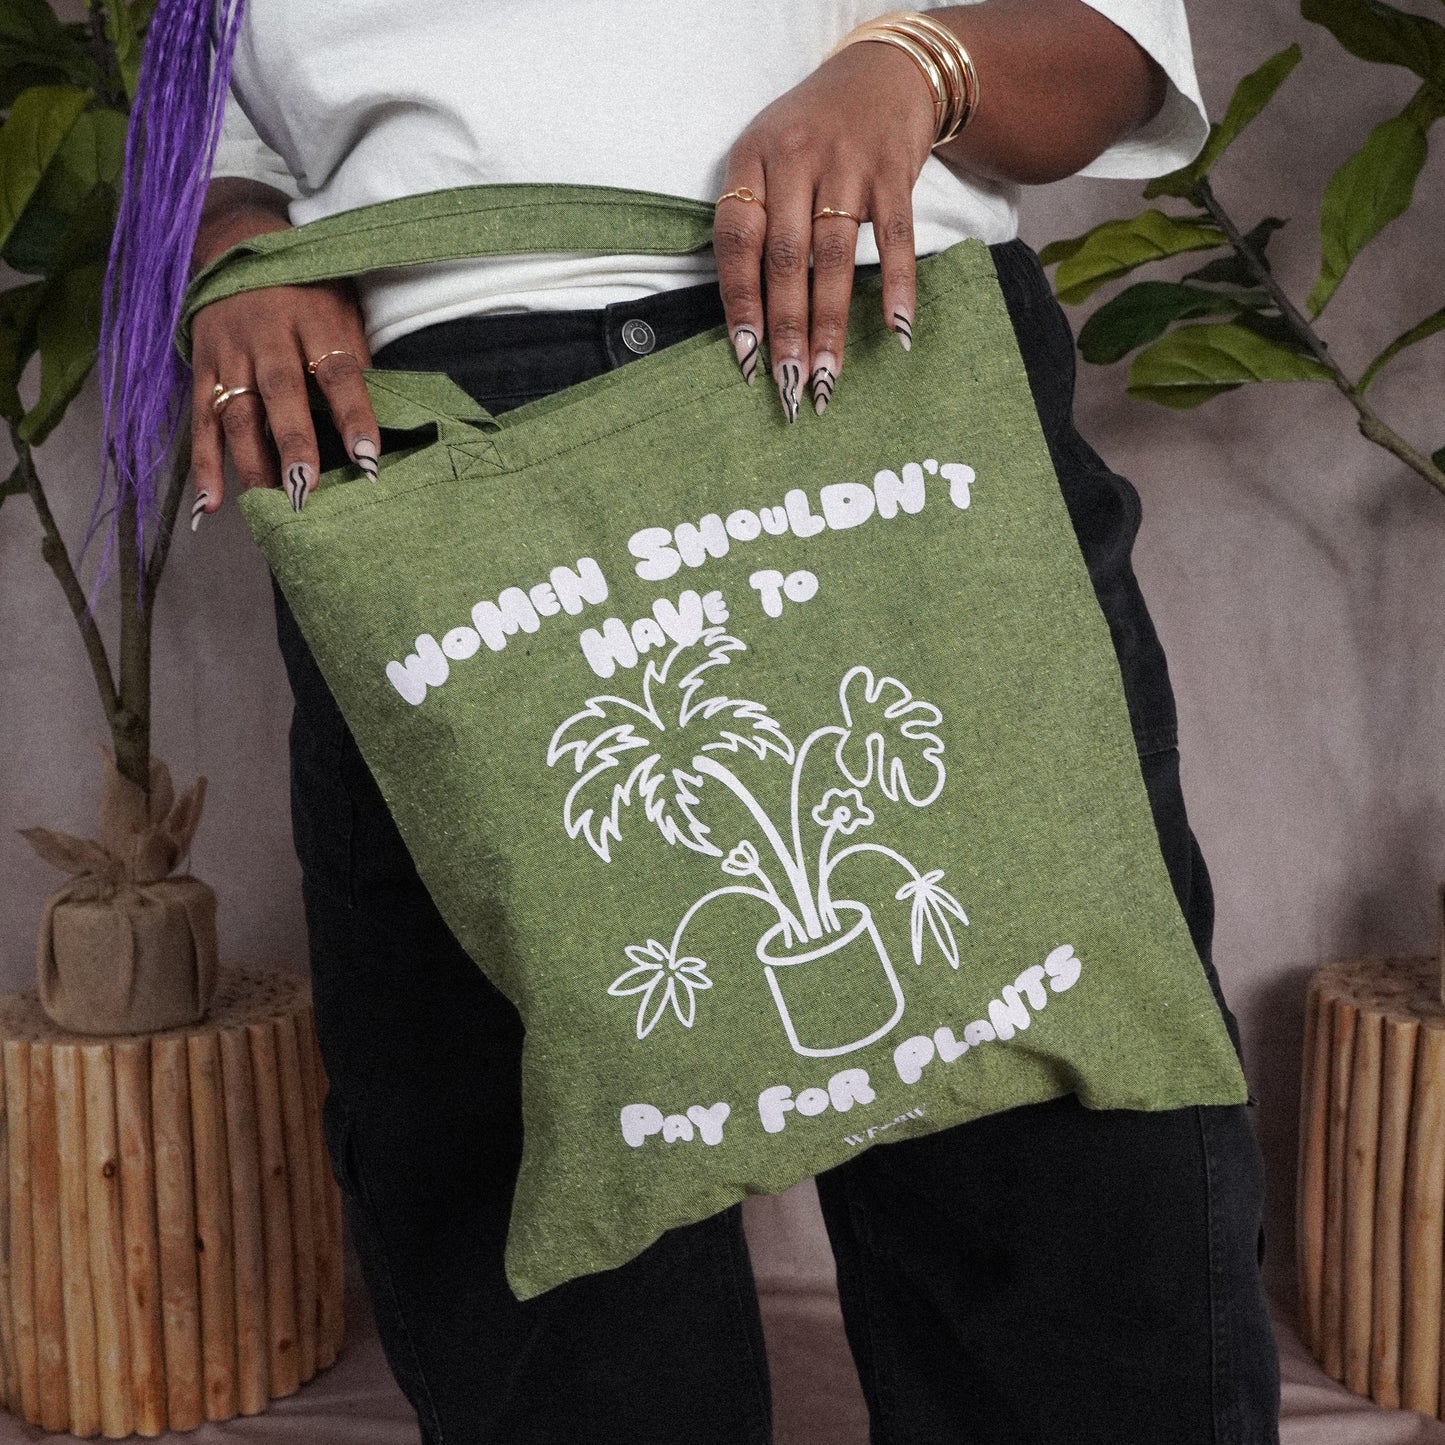 Women Shouldn't Have to Pay For Plants Tote